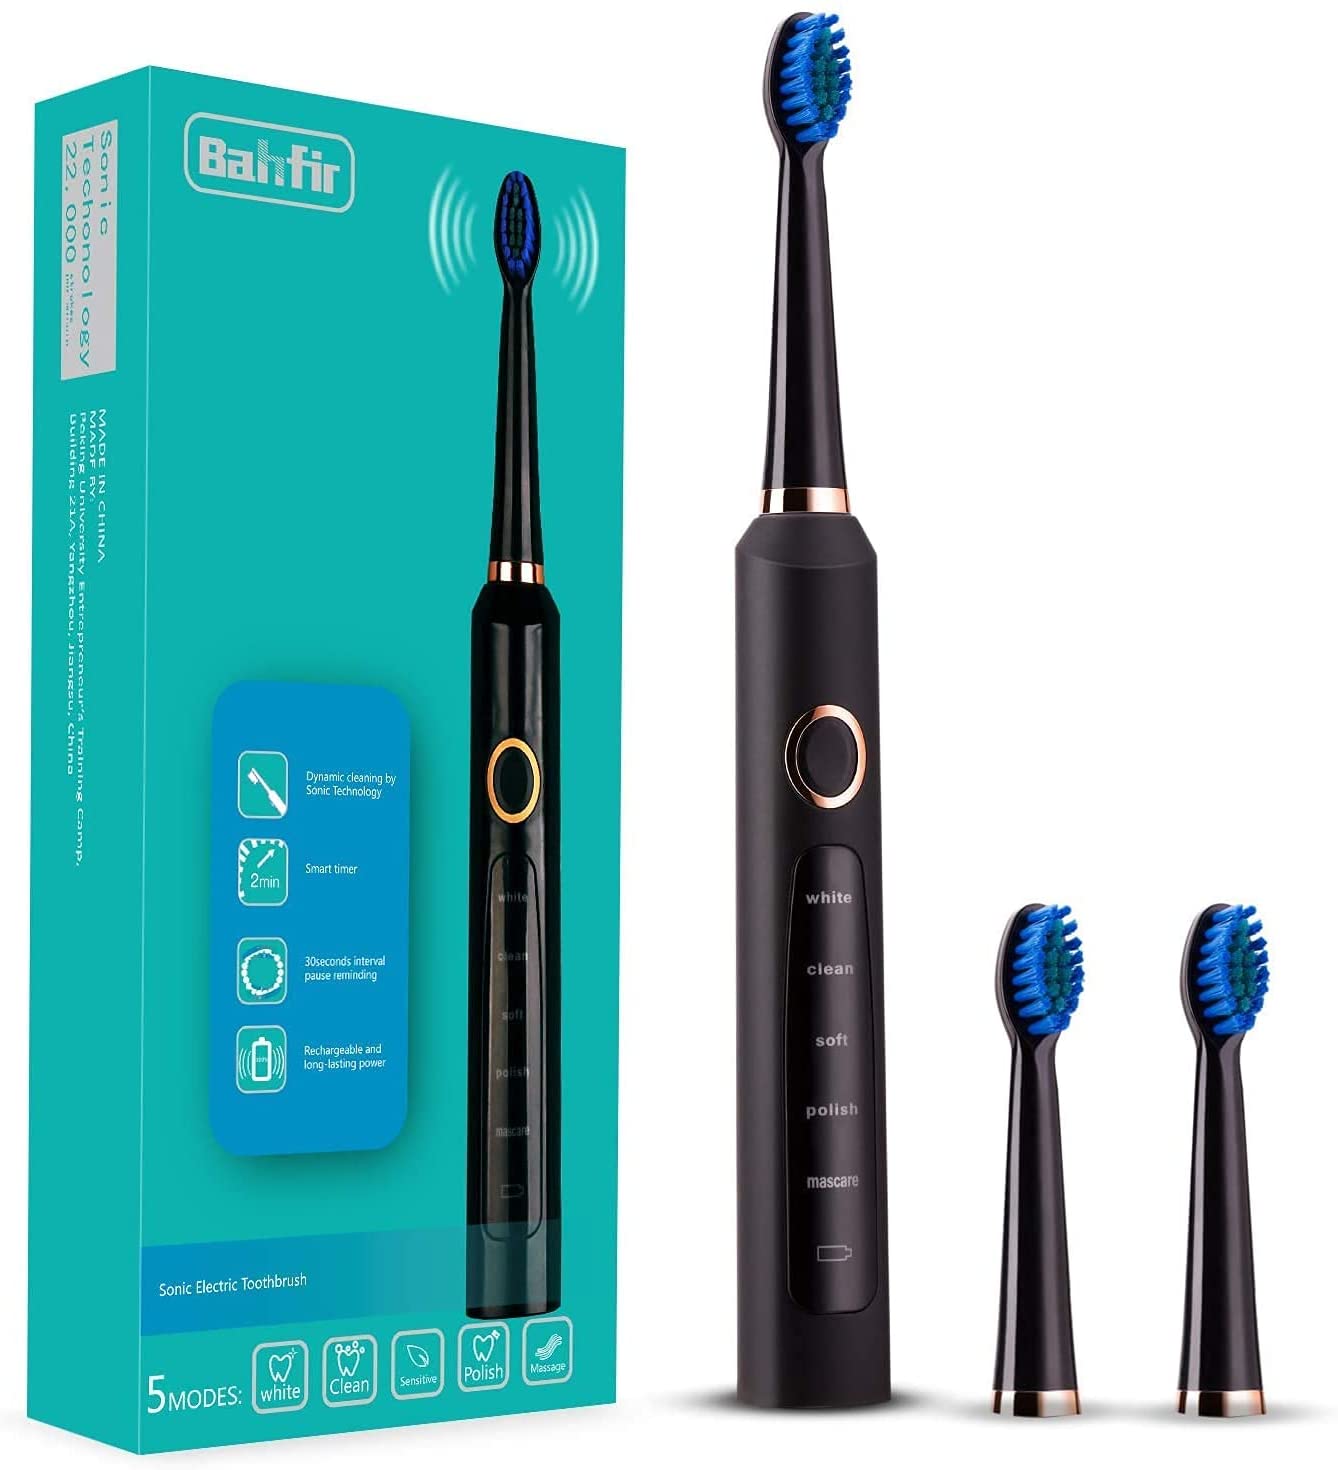 Bahfir Sonic Electric Toothbrush Ultra Cleaning Rechargeable 1 Time Charging 30 Days Use 5 Modes Power Toothbrush Waterproof 3 Brush Heads with Smart Timer for Adults and Kids, Black - Home Decor Gifts and More